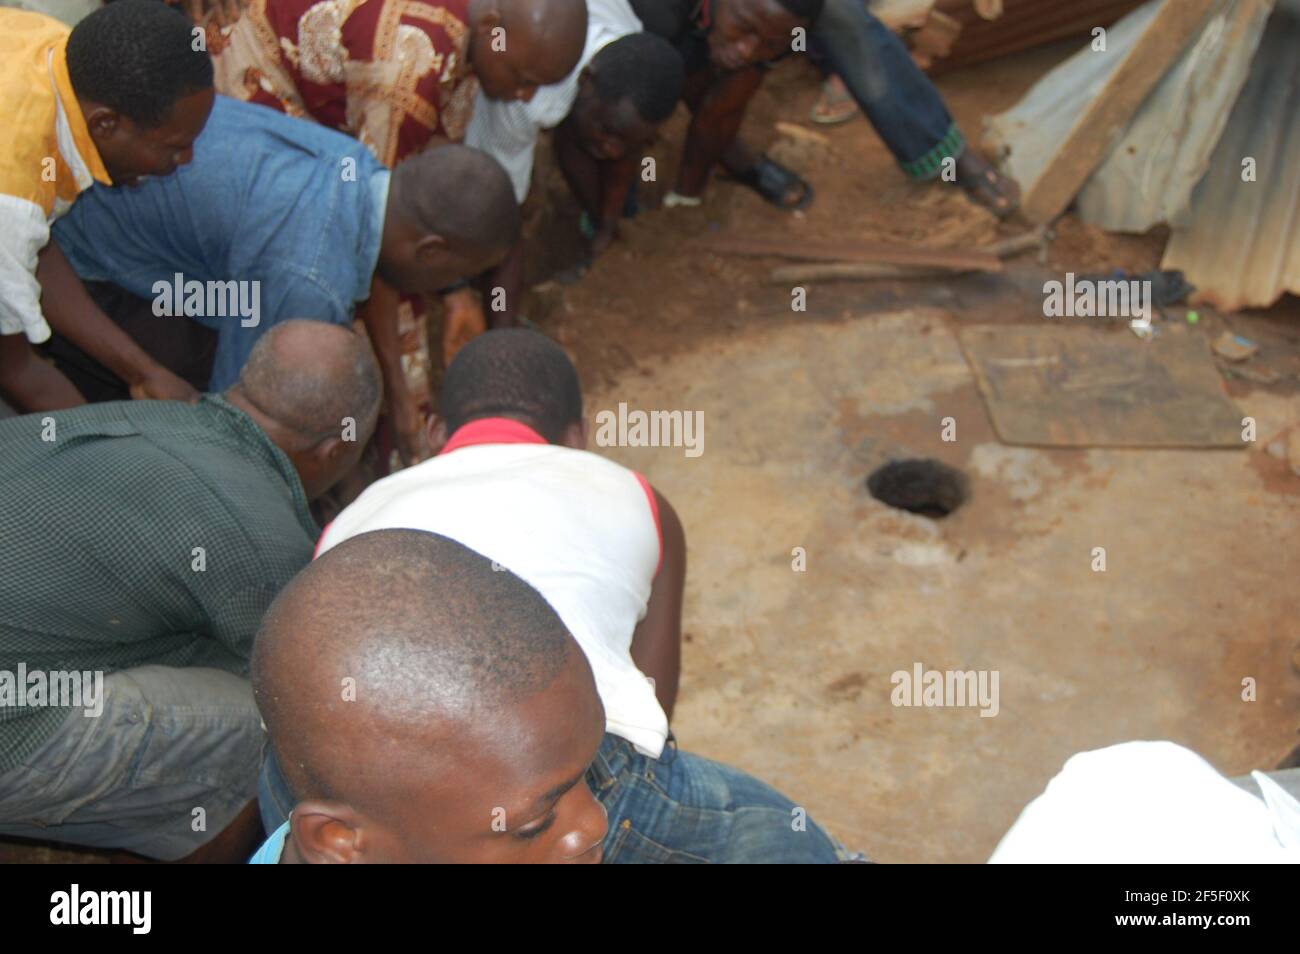 1. Abandoned Baby: Youths in the Community removing the concrete slab from the pit toilet to rescue the newborn baby, Lagos, Nigeria. Stock Photo